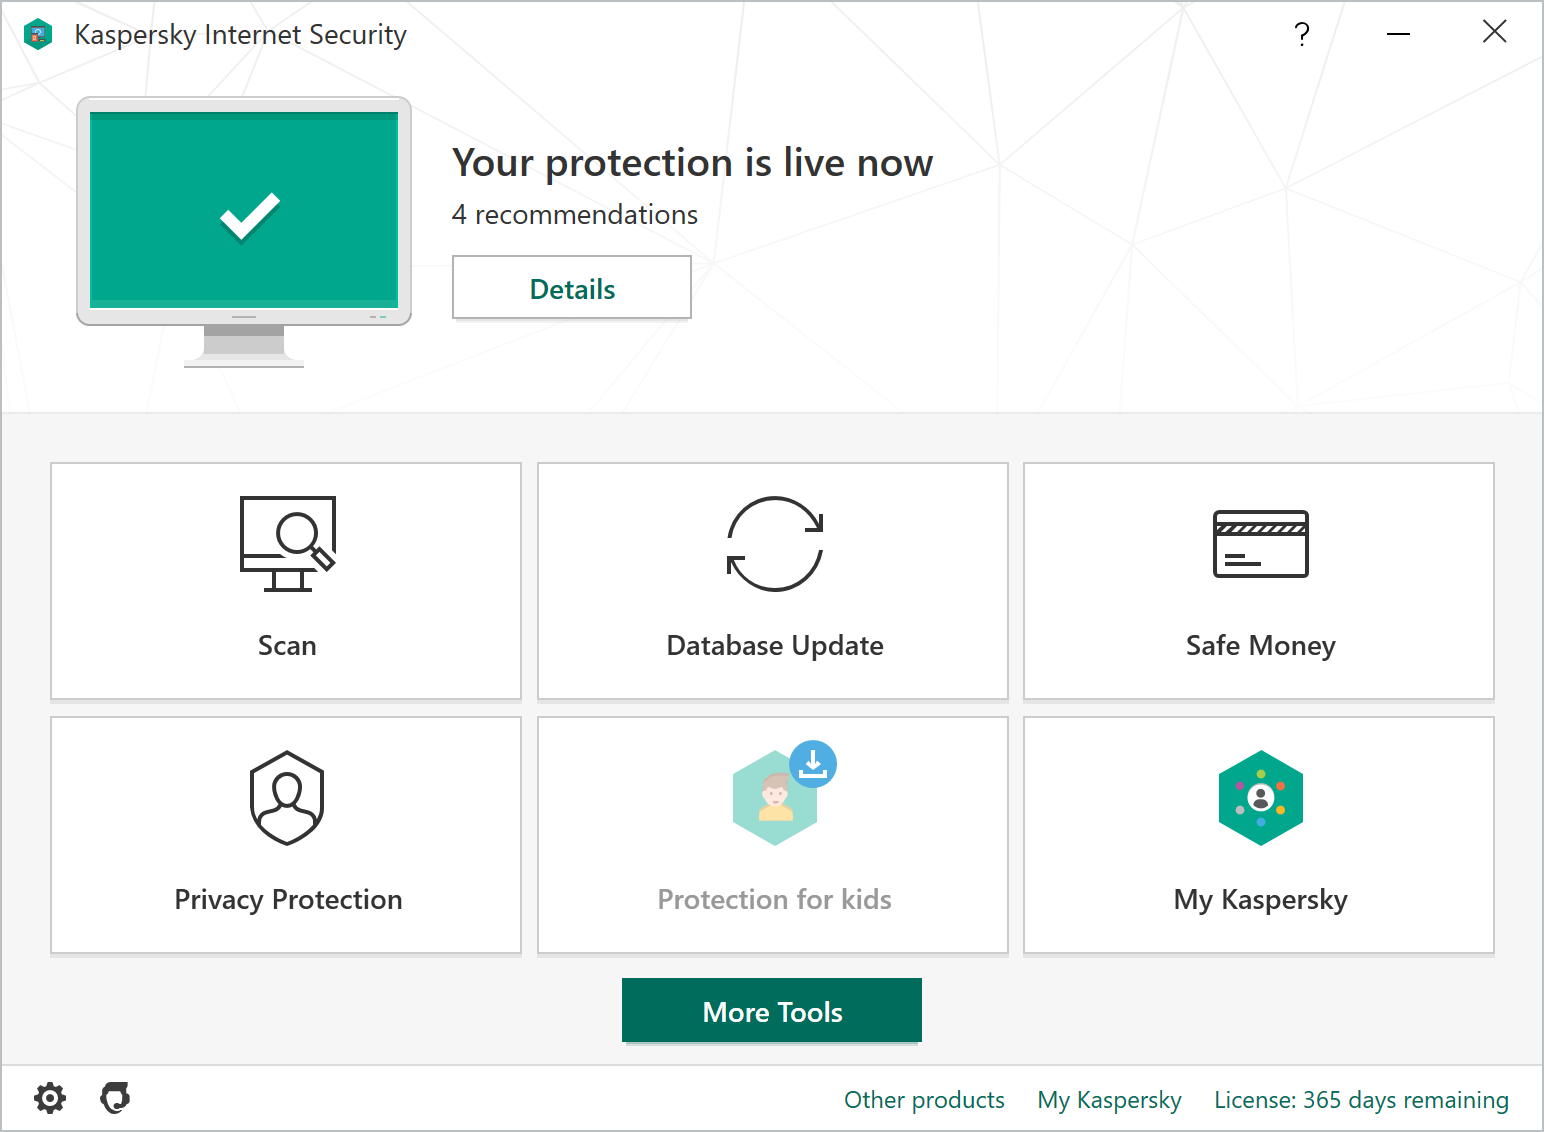 kaspersky total security 2021 3 devices 1 year